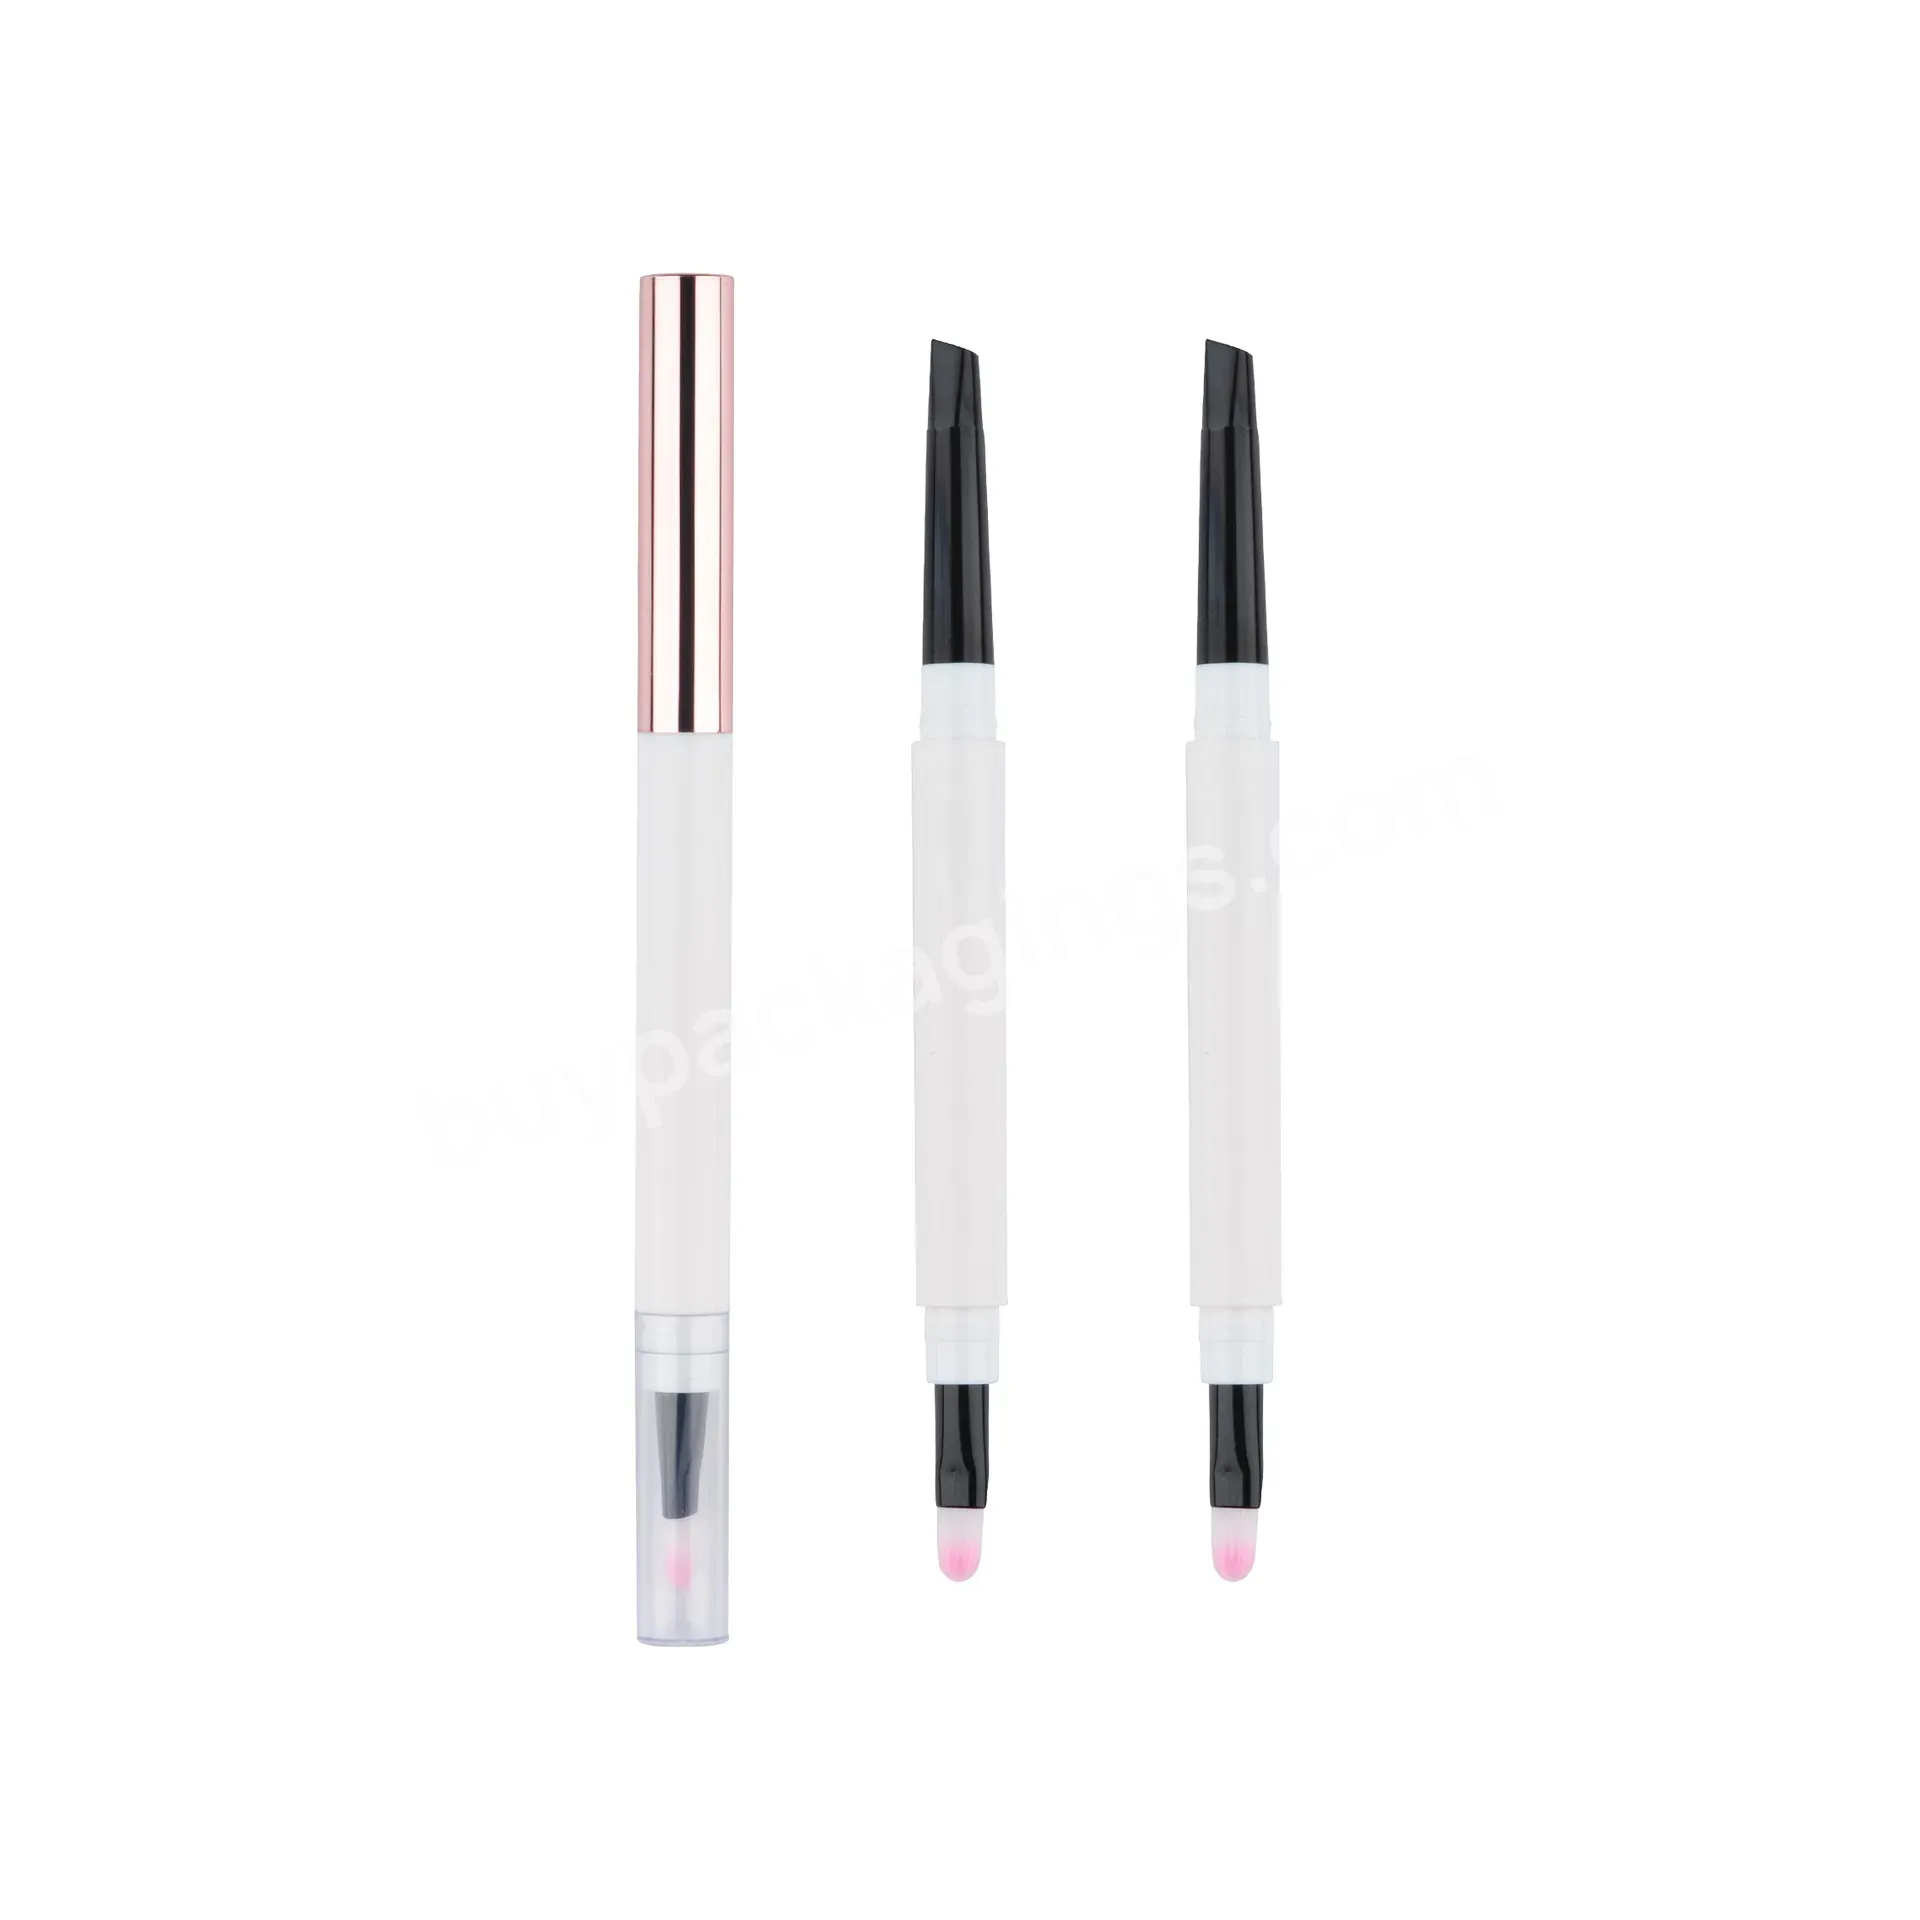 Private Label Customize Yh-m22 Automatic Lip Liner Empty Container Pen Tube Lipliner Pencil Plastic Packaging With Brush - Buy Eyebrow Pencil Plastic Packaging,Eyebrow Pencil Container,Eyebrow Pencil Packaging.